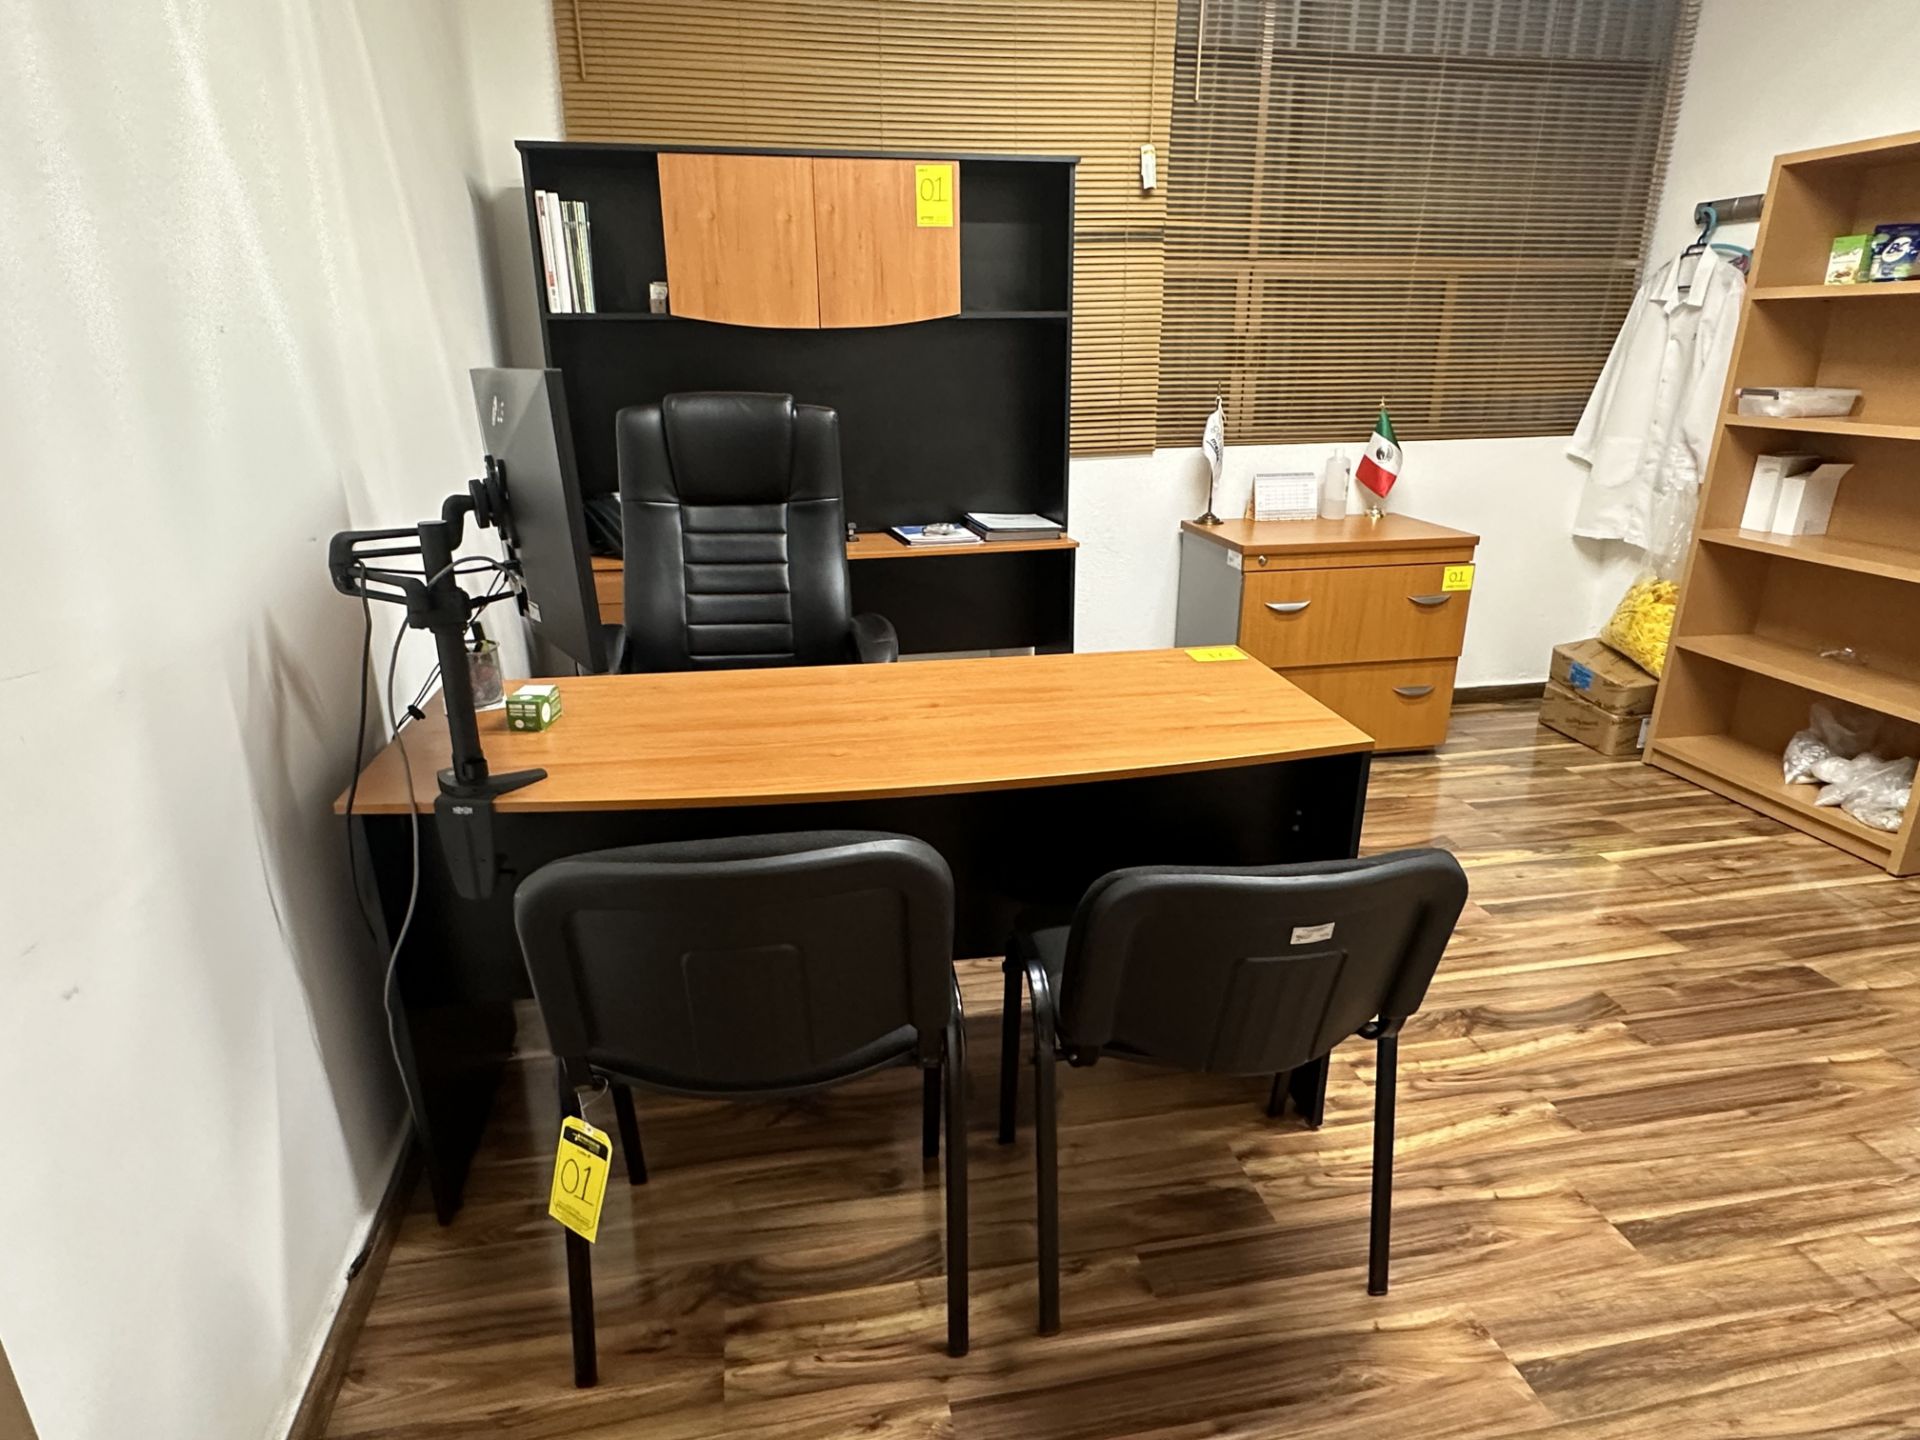 Lot of office furniture includes: 1 Desk in brown wood measures approximately 1.50 x 0.60 x 0.75 m; - Image 7 of 18